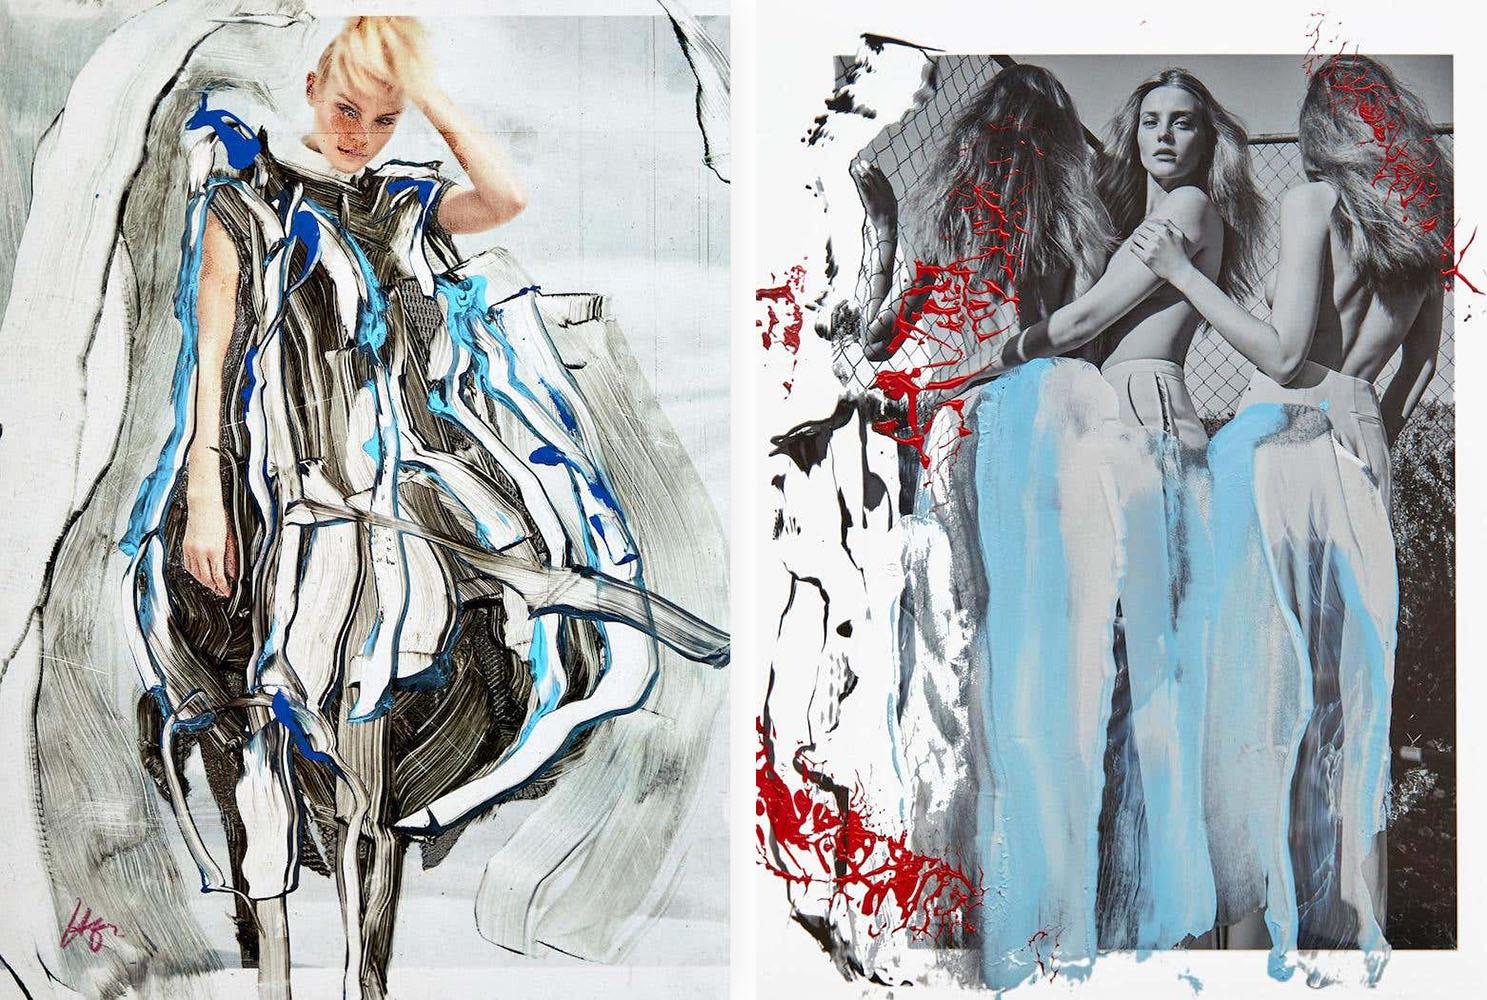 Diptych: Nymphs Empty Spaces and Maiol Nymphs. One of a Kind photocollage